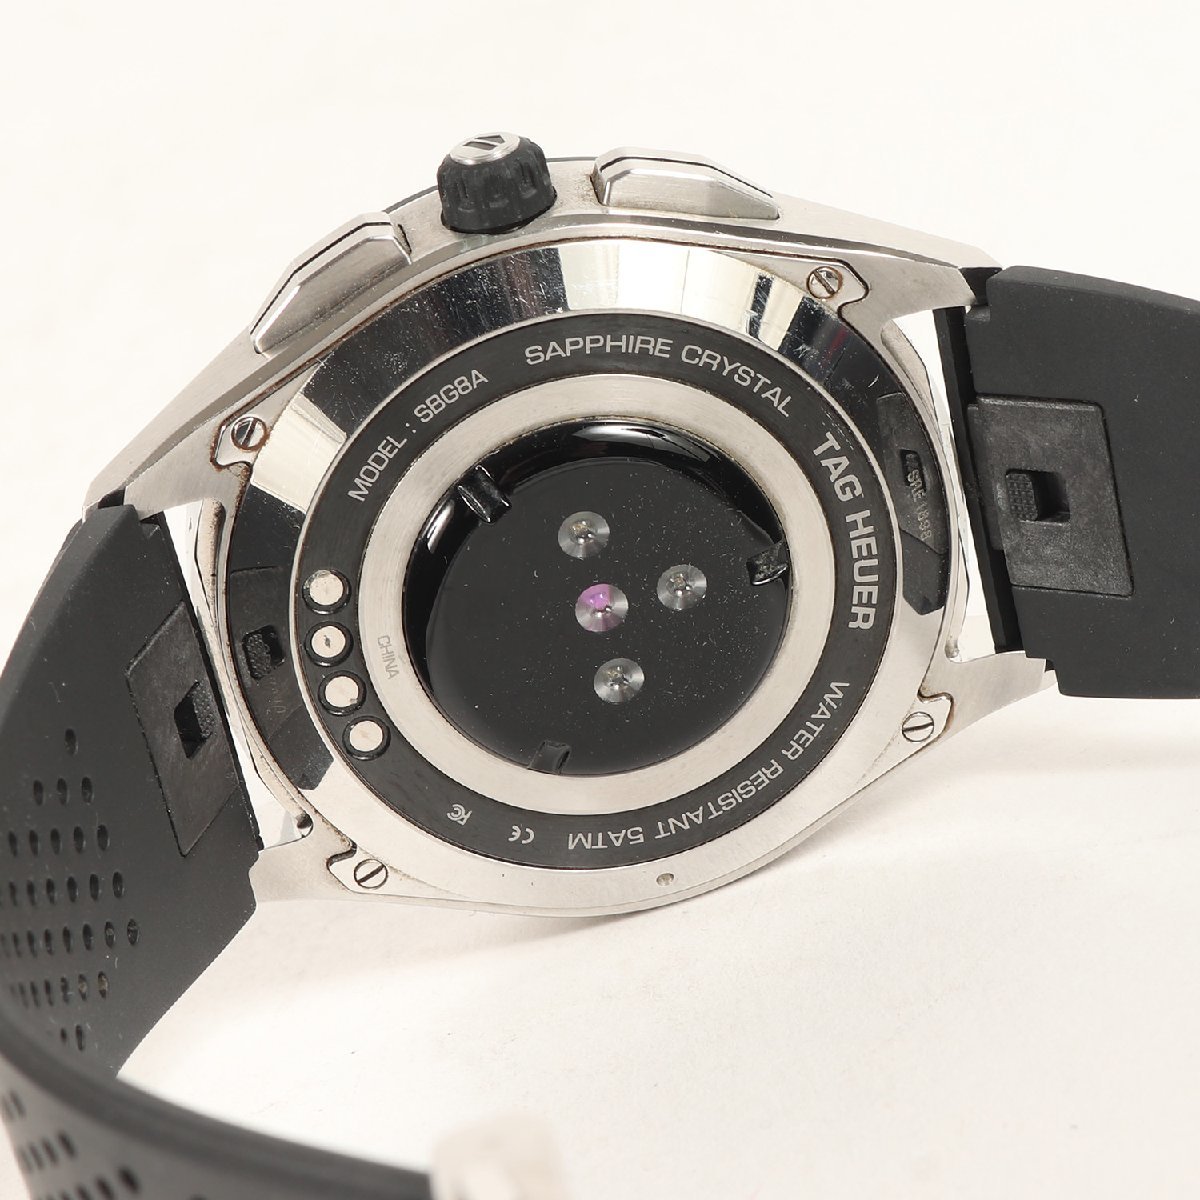 TAG HEUER TAG Heuer 2020 year no. 3 generation stainless steel smart watch TAG HEUER CONNECTED connector ktedoWear OS by Google